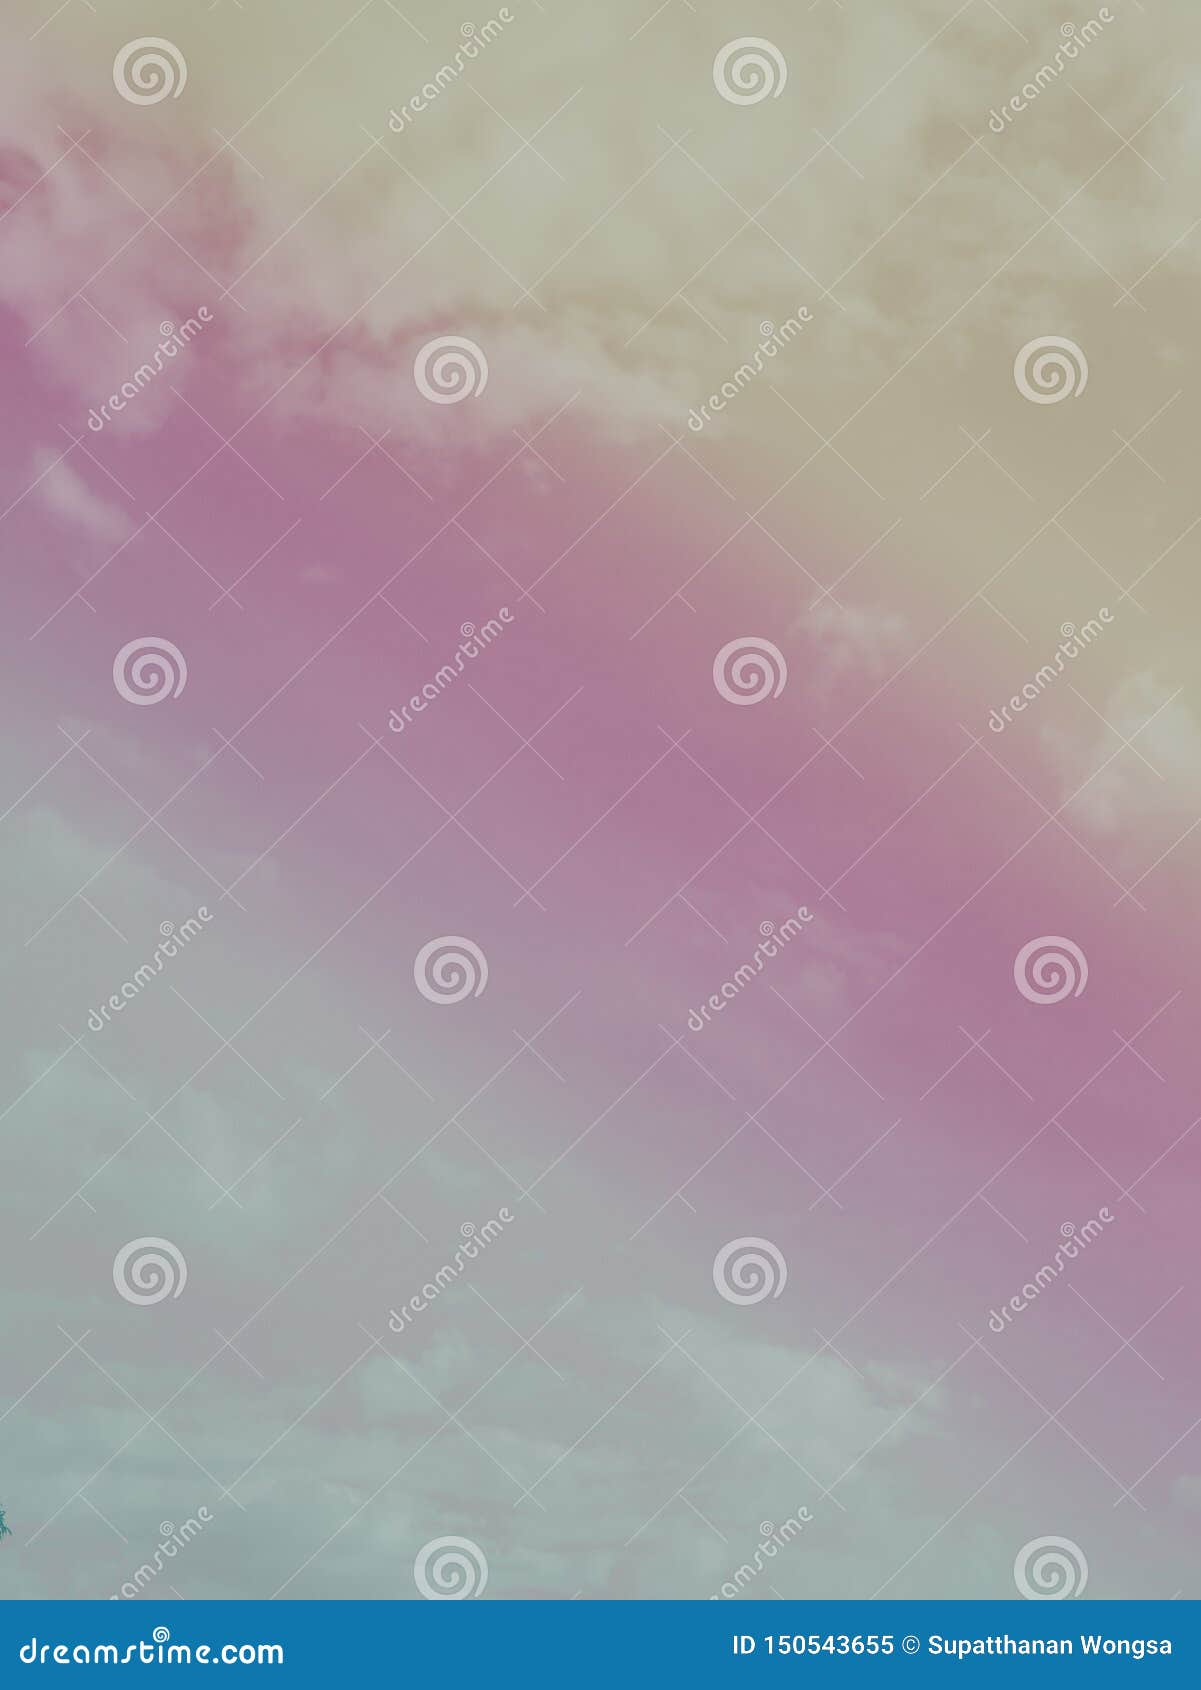 Sky and Gradient Pastel Blue, Pink, Yellow Sky Background Stock Image ...